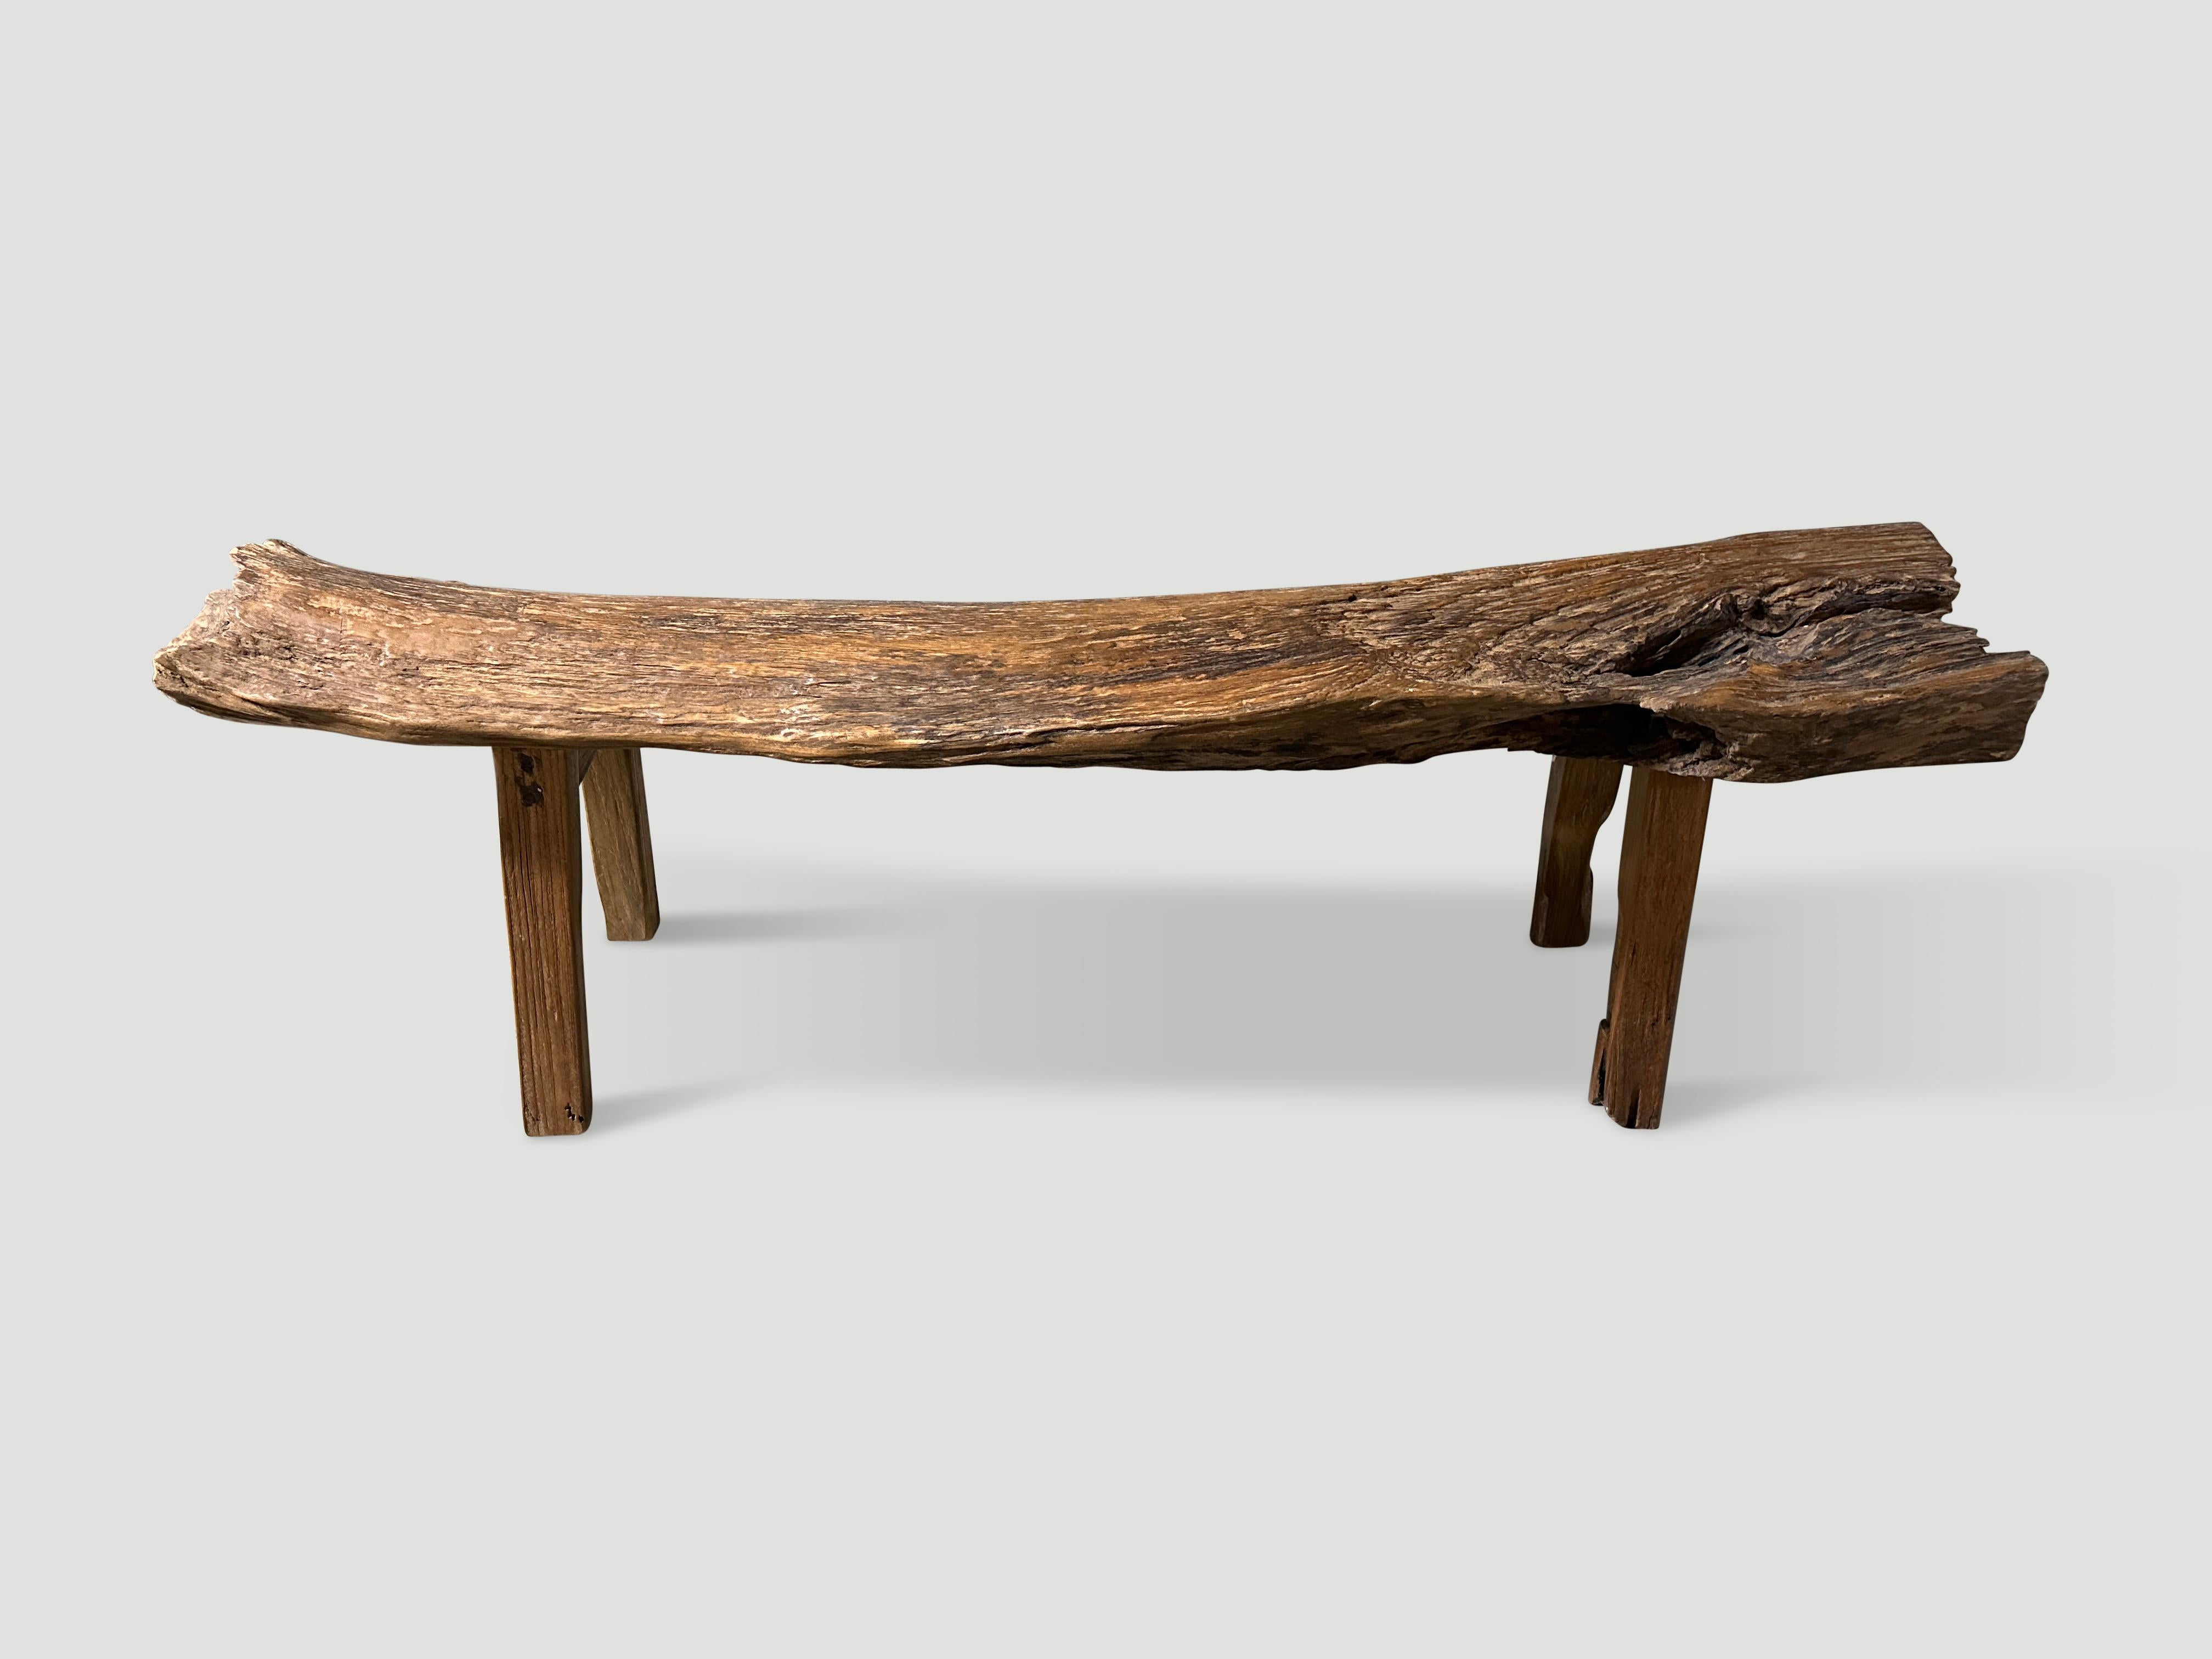 Antique bench with beautiful character hand made from a single thick teak log with lovely patina. Circa 1950.

This bench was hand made in the spirit of Wabi-Sabi, a Japanese philosophy that beauty can be found in imperfection and impermanence. It